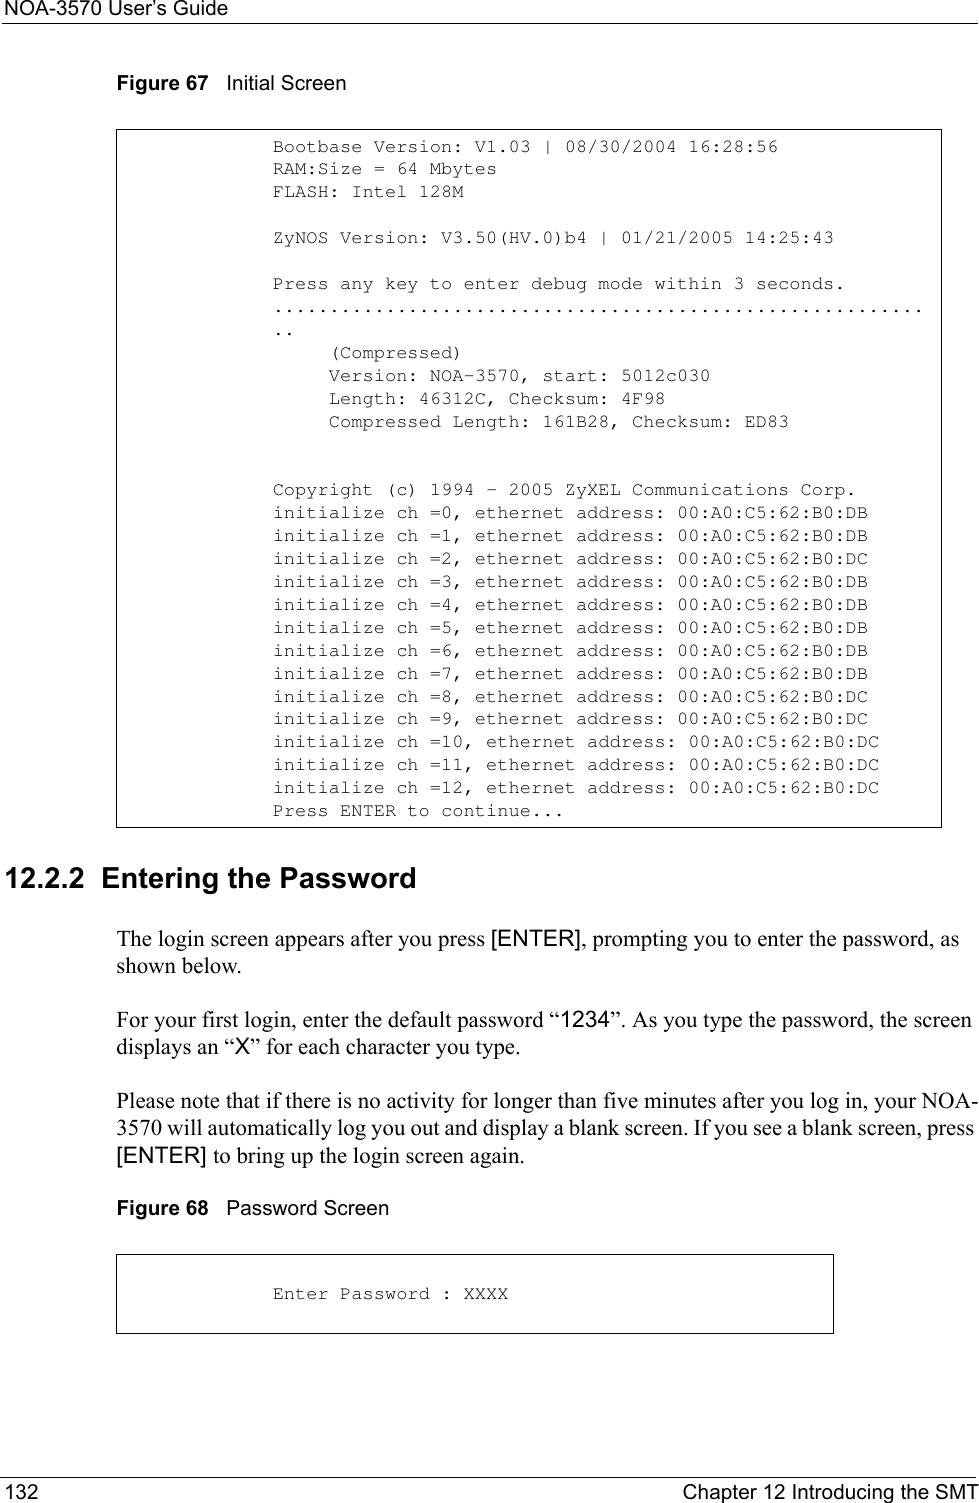 NOA-3570 User’s Guide132 Chapter 12 Introducing the SMTFigure 67   Initial Screen12.2.2  Entering the PasswordThe login screen appears after you press [ENTER], prompting you to enter the password, as shown below.For your first login, enter the default password “1234”. As you type the password, the screen displays an “X” for each character you type.Please note that if there is no activity for longer than five minutes after you log in, your NOA-3570 will automatically log you out and display a blank screen. If you see a blank screen, press [ENTER] to bring up the login screen again.Figure 68   Password Screen Bootbase Version: V1.03 | 08/30/2004 16:28:56RAM:Size = 64 MbytesFLASH: Intel 128MZyNOS Version: V3.50(HV.0)b4 | 01/21/2005 14:25:43Press any key to enter debug mode within 3 seconds.............................................................     (Compressed)     Version: NOA-3570, start: 5012c030     Length: 46312C, Checksum: 4F98     Compressed Length: 161B28, Checksum: ED83Copyright (c) 1994 - 2005 ZyXEL Communications Corp.initialize ch =0, ethernet address: 00:A0:C5:62:B0:DBinitialize ch =1, ethernet address: 00:A0:C5:62:B0:DBinitialize ch =2, ethernet address: 00:A0:C5:62:B0:DCinitialize ch =3, ethernet address: 00:A0:C5:62:B0:DBinitialize ch =4, ethernet address: 00:A0:C5:62:B0:DBinitialize ch =5, ethernet address: 00:A0:C5:62:B0:DBinitialize ch =6, ethernet address: 00:A0:C5:62:B0:DBinitialize ch =7, ethernet address: 00:A0:C5:62:B0:DBinitialize ch =8, ethernet address: 00:A0:C5:62:B0:DCinitialize ch =9, ethernet address: 00:A0:C5:62:B0:DCinitialize ch =10, ethernet address: 00:A0:C5:62:B0:DCinitialize ch =11, ethernet address: 00:A0:C5:62:B0:DCinitialize ch =12, ethernet address: 00:A0:C5:62:B0:DCPress ENTER to continue...Enter Password : XXXX